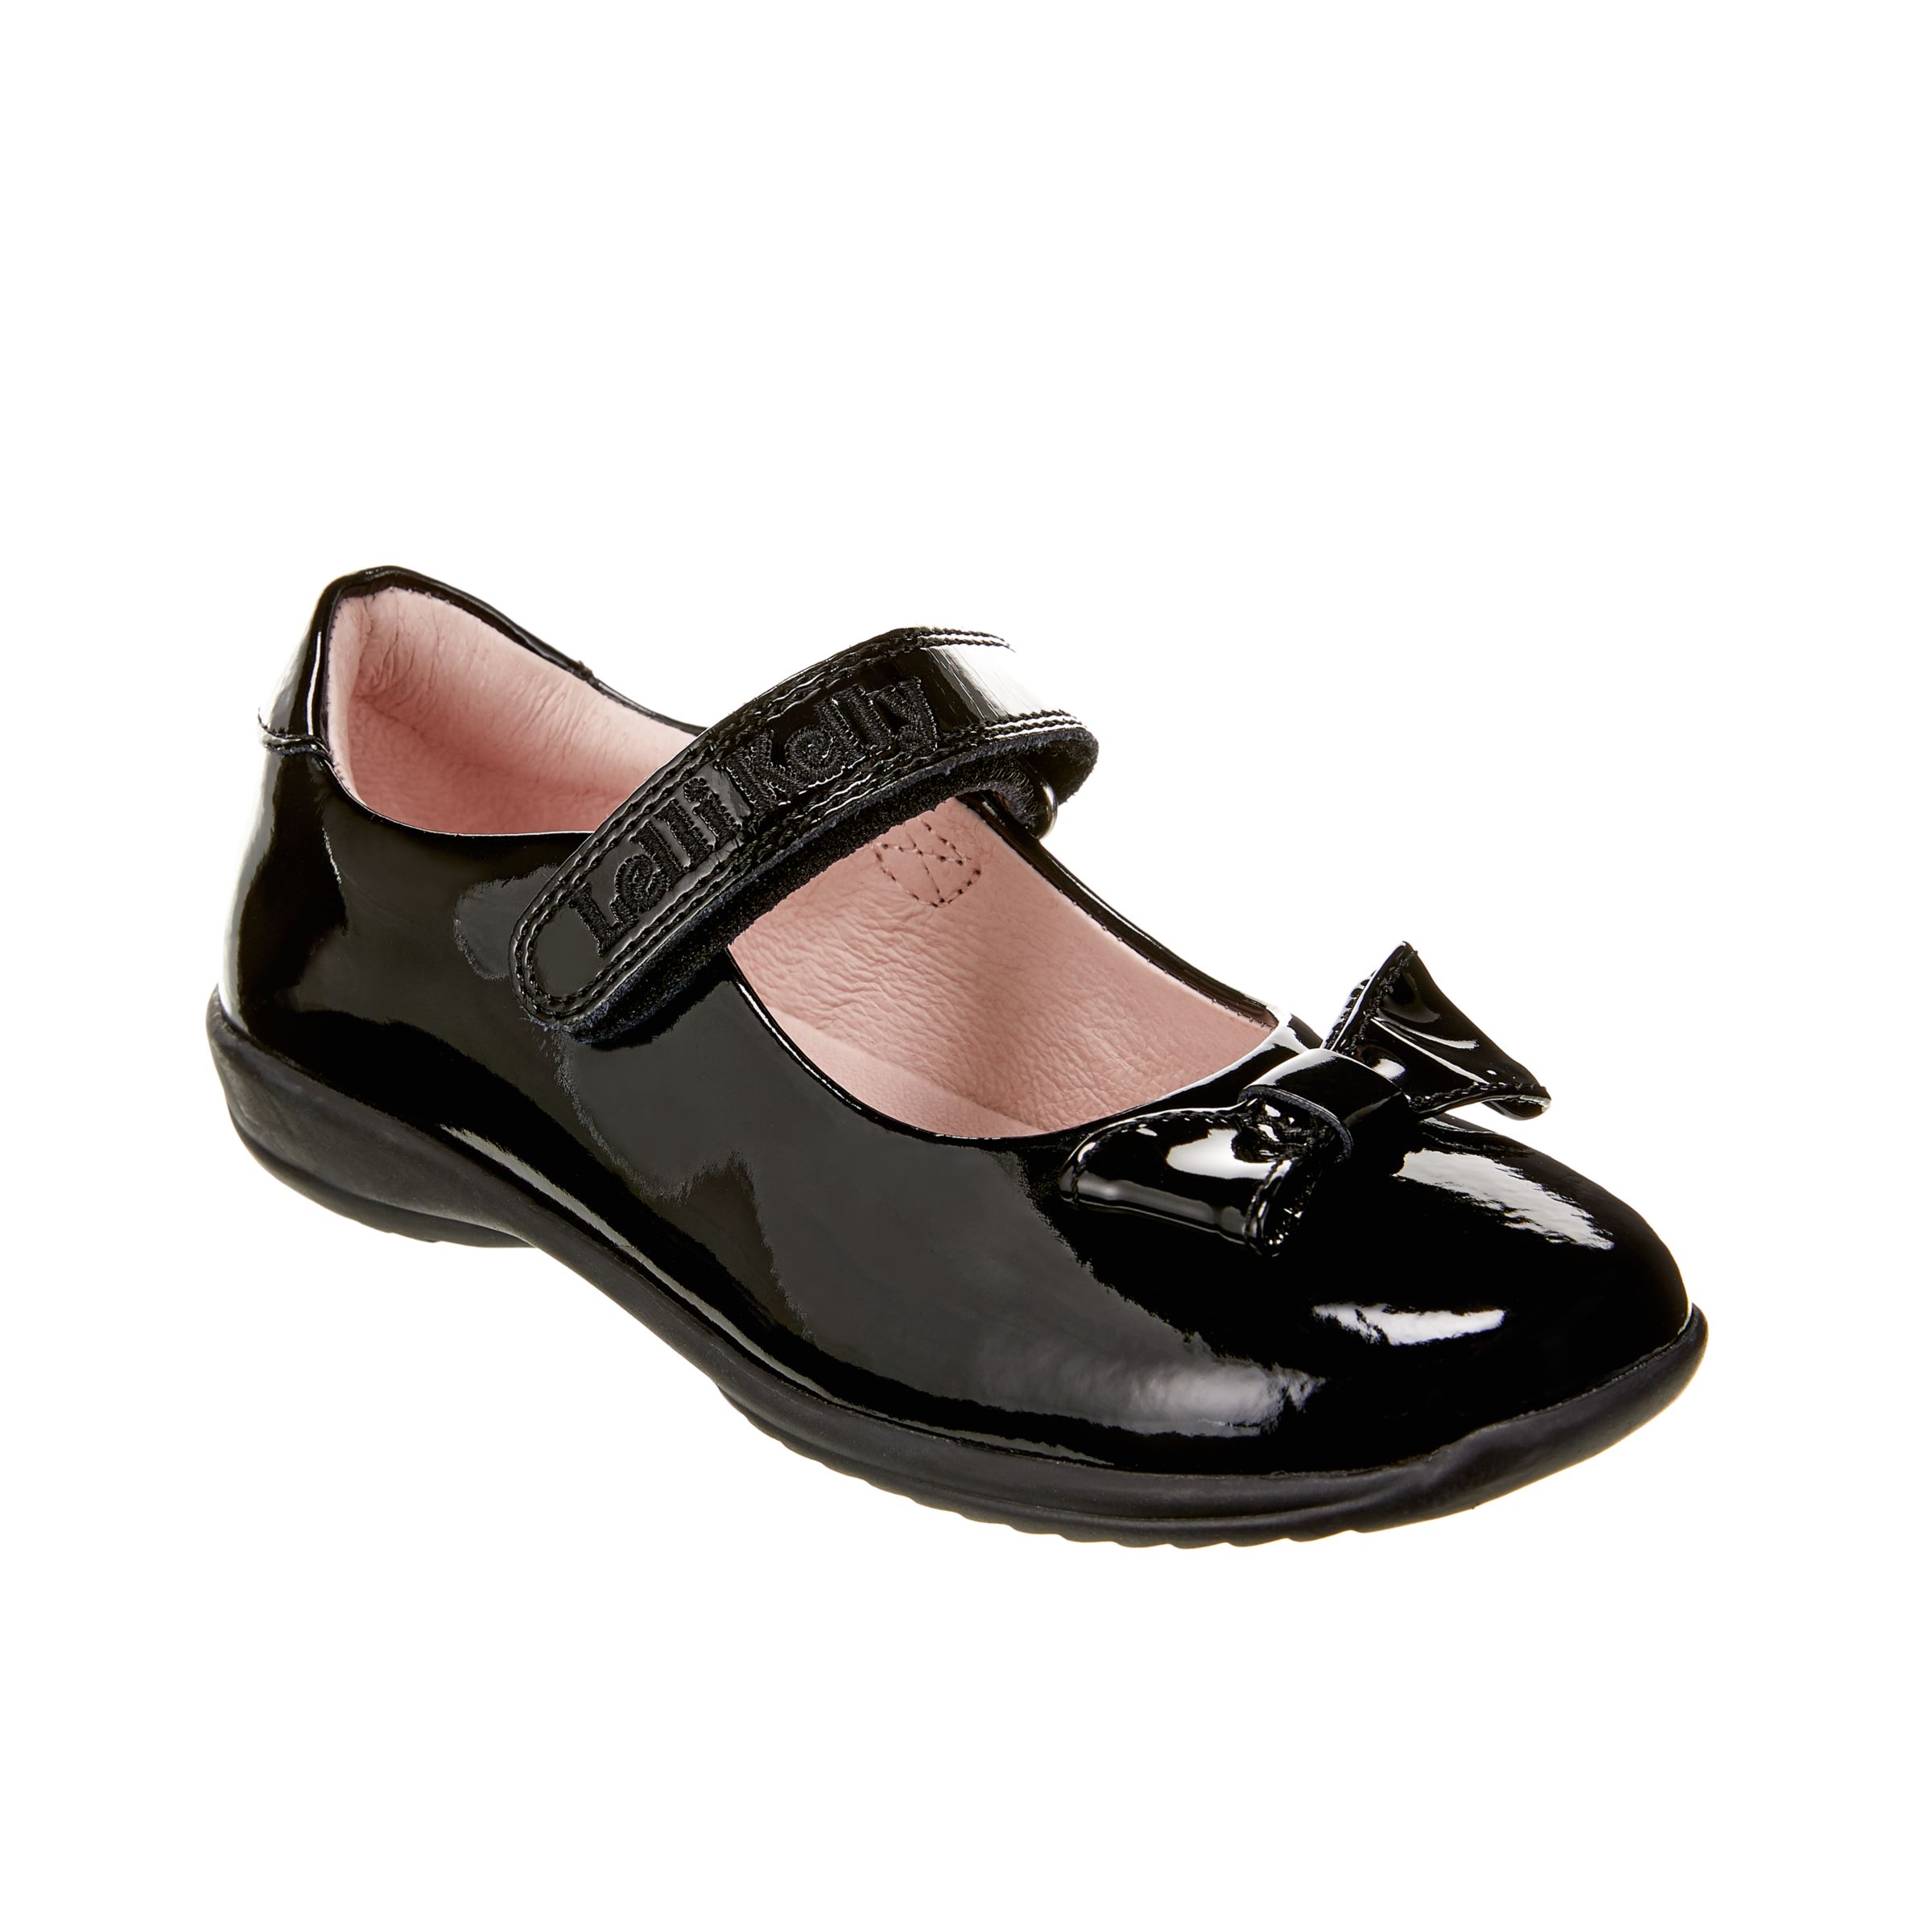 Lelli Kelly Children's Perrie Patent Leather Shoes, Black